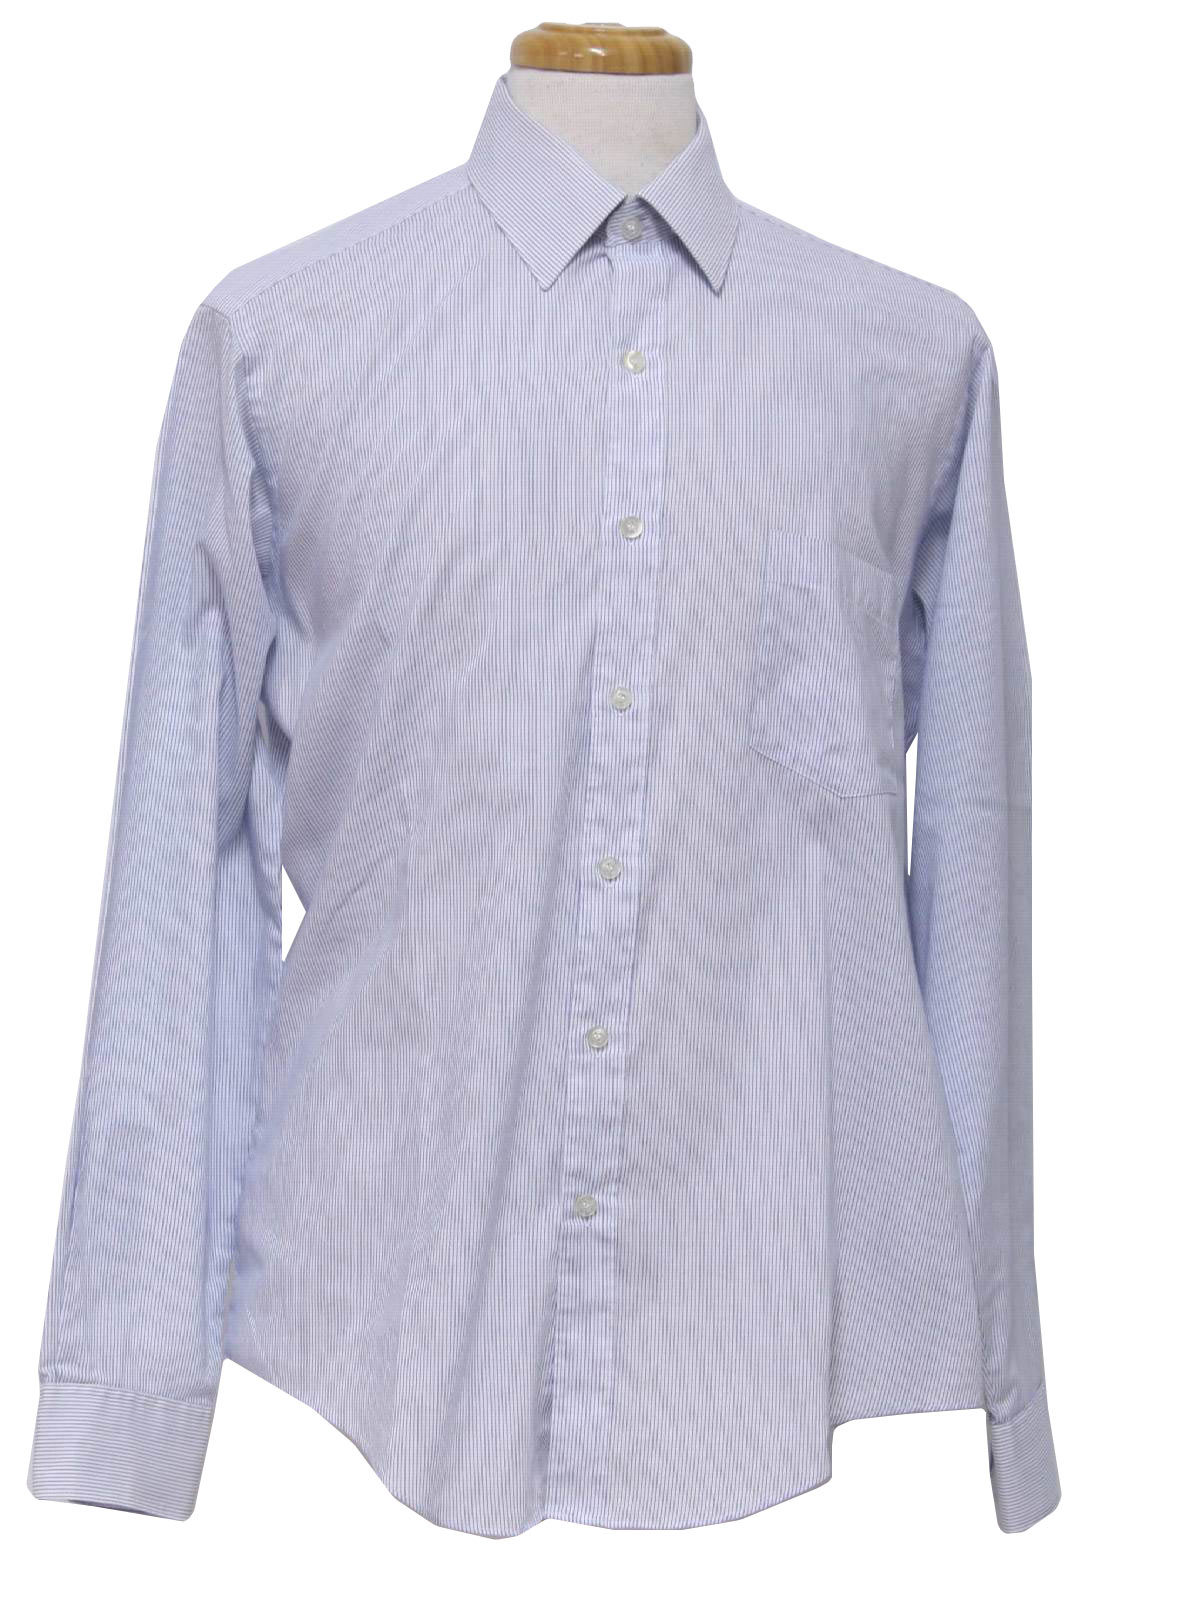 Retro 1980's Shirt (Ketch) : 80s -Ketch- Mens white and blue woven-in ...